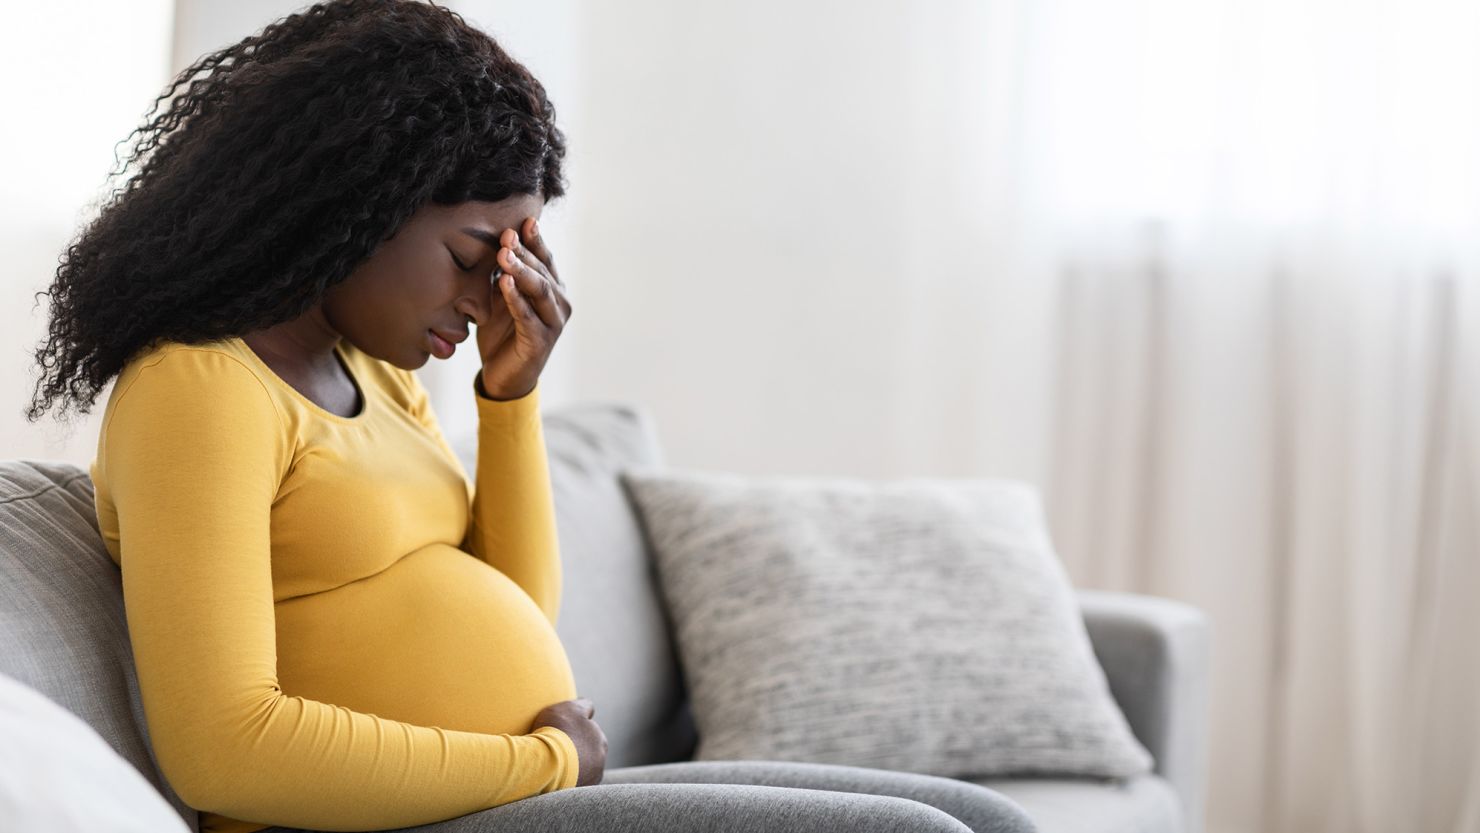 Stress during pregnancy may have a negative emotional impact on babies,  study finds